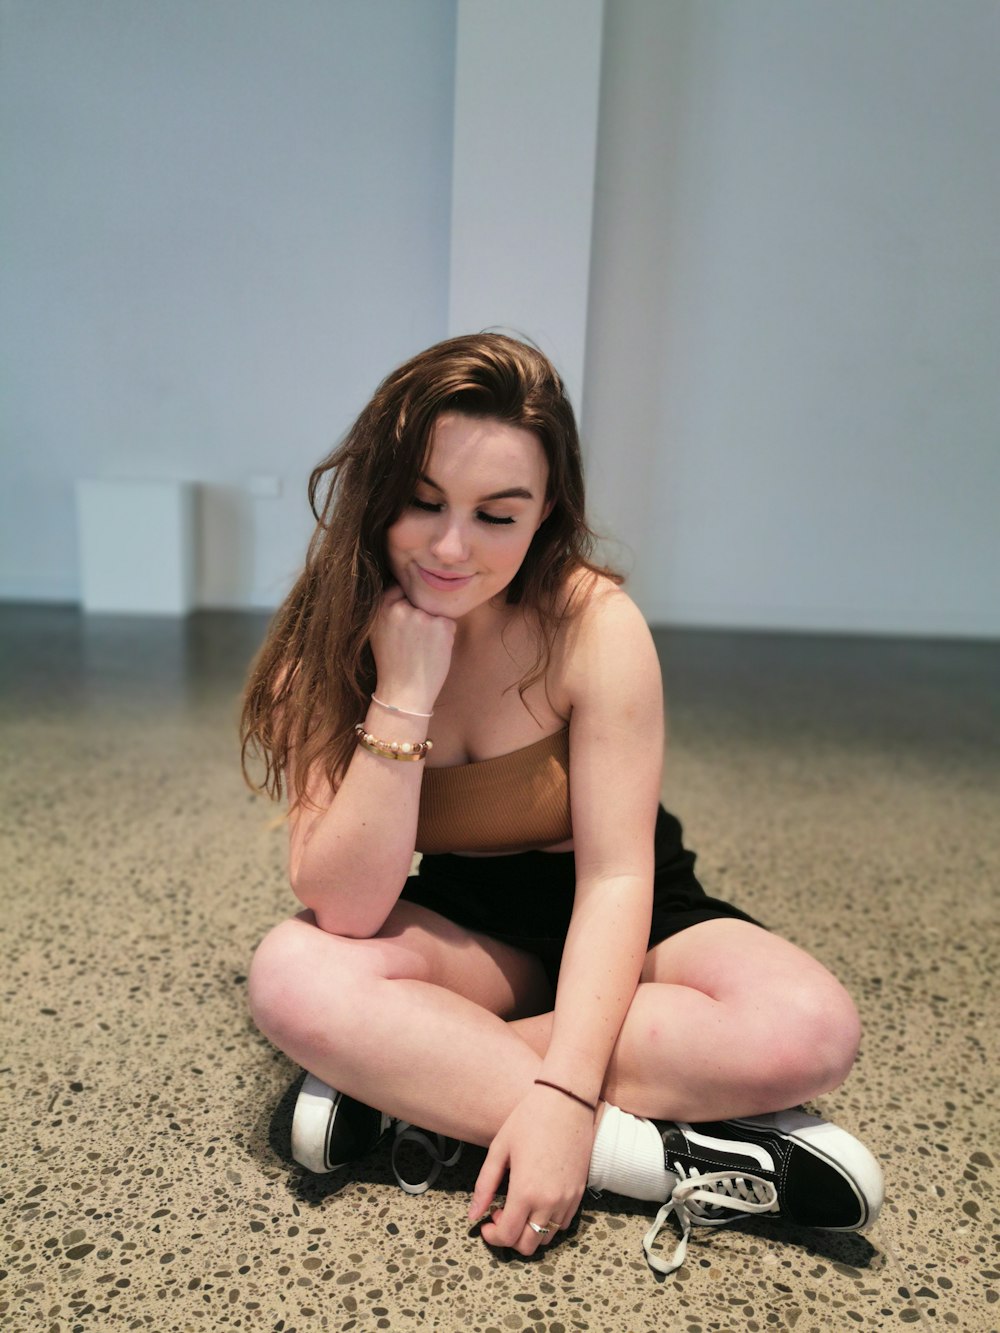 unknown person sitting on floor indoors